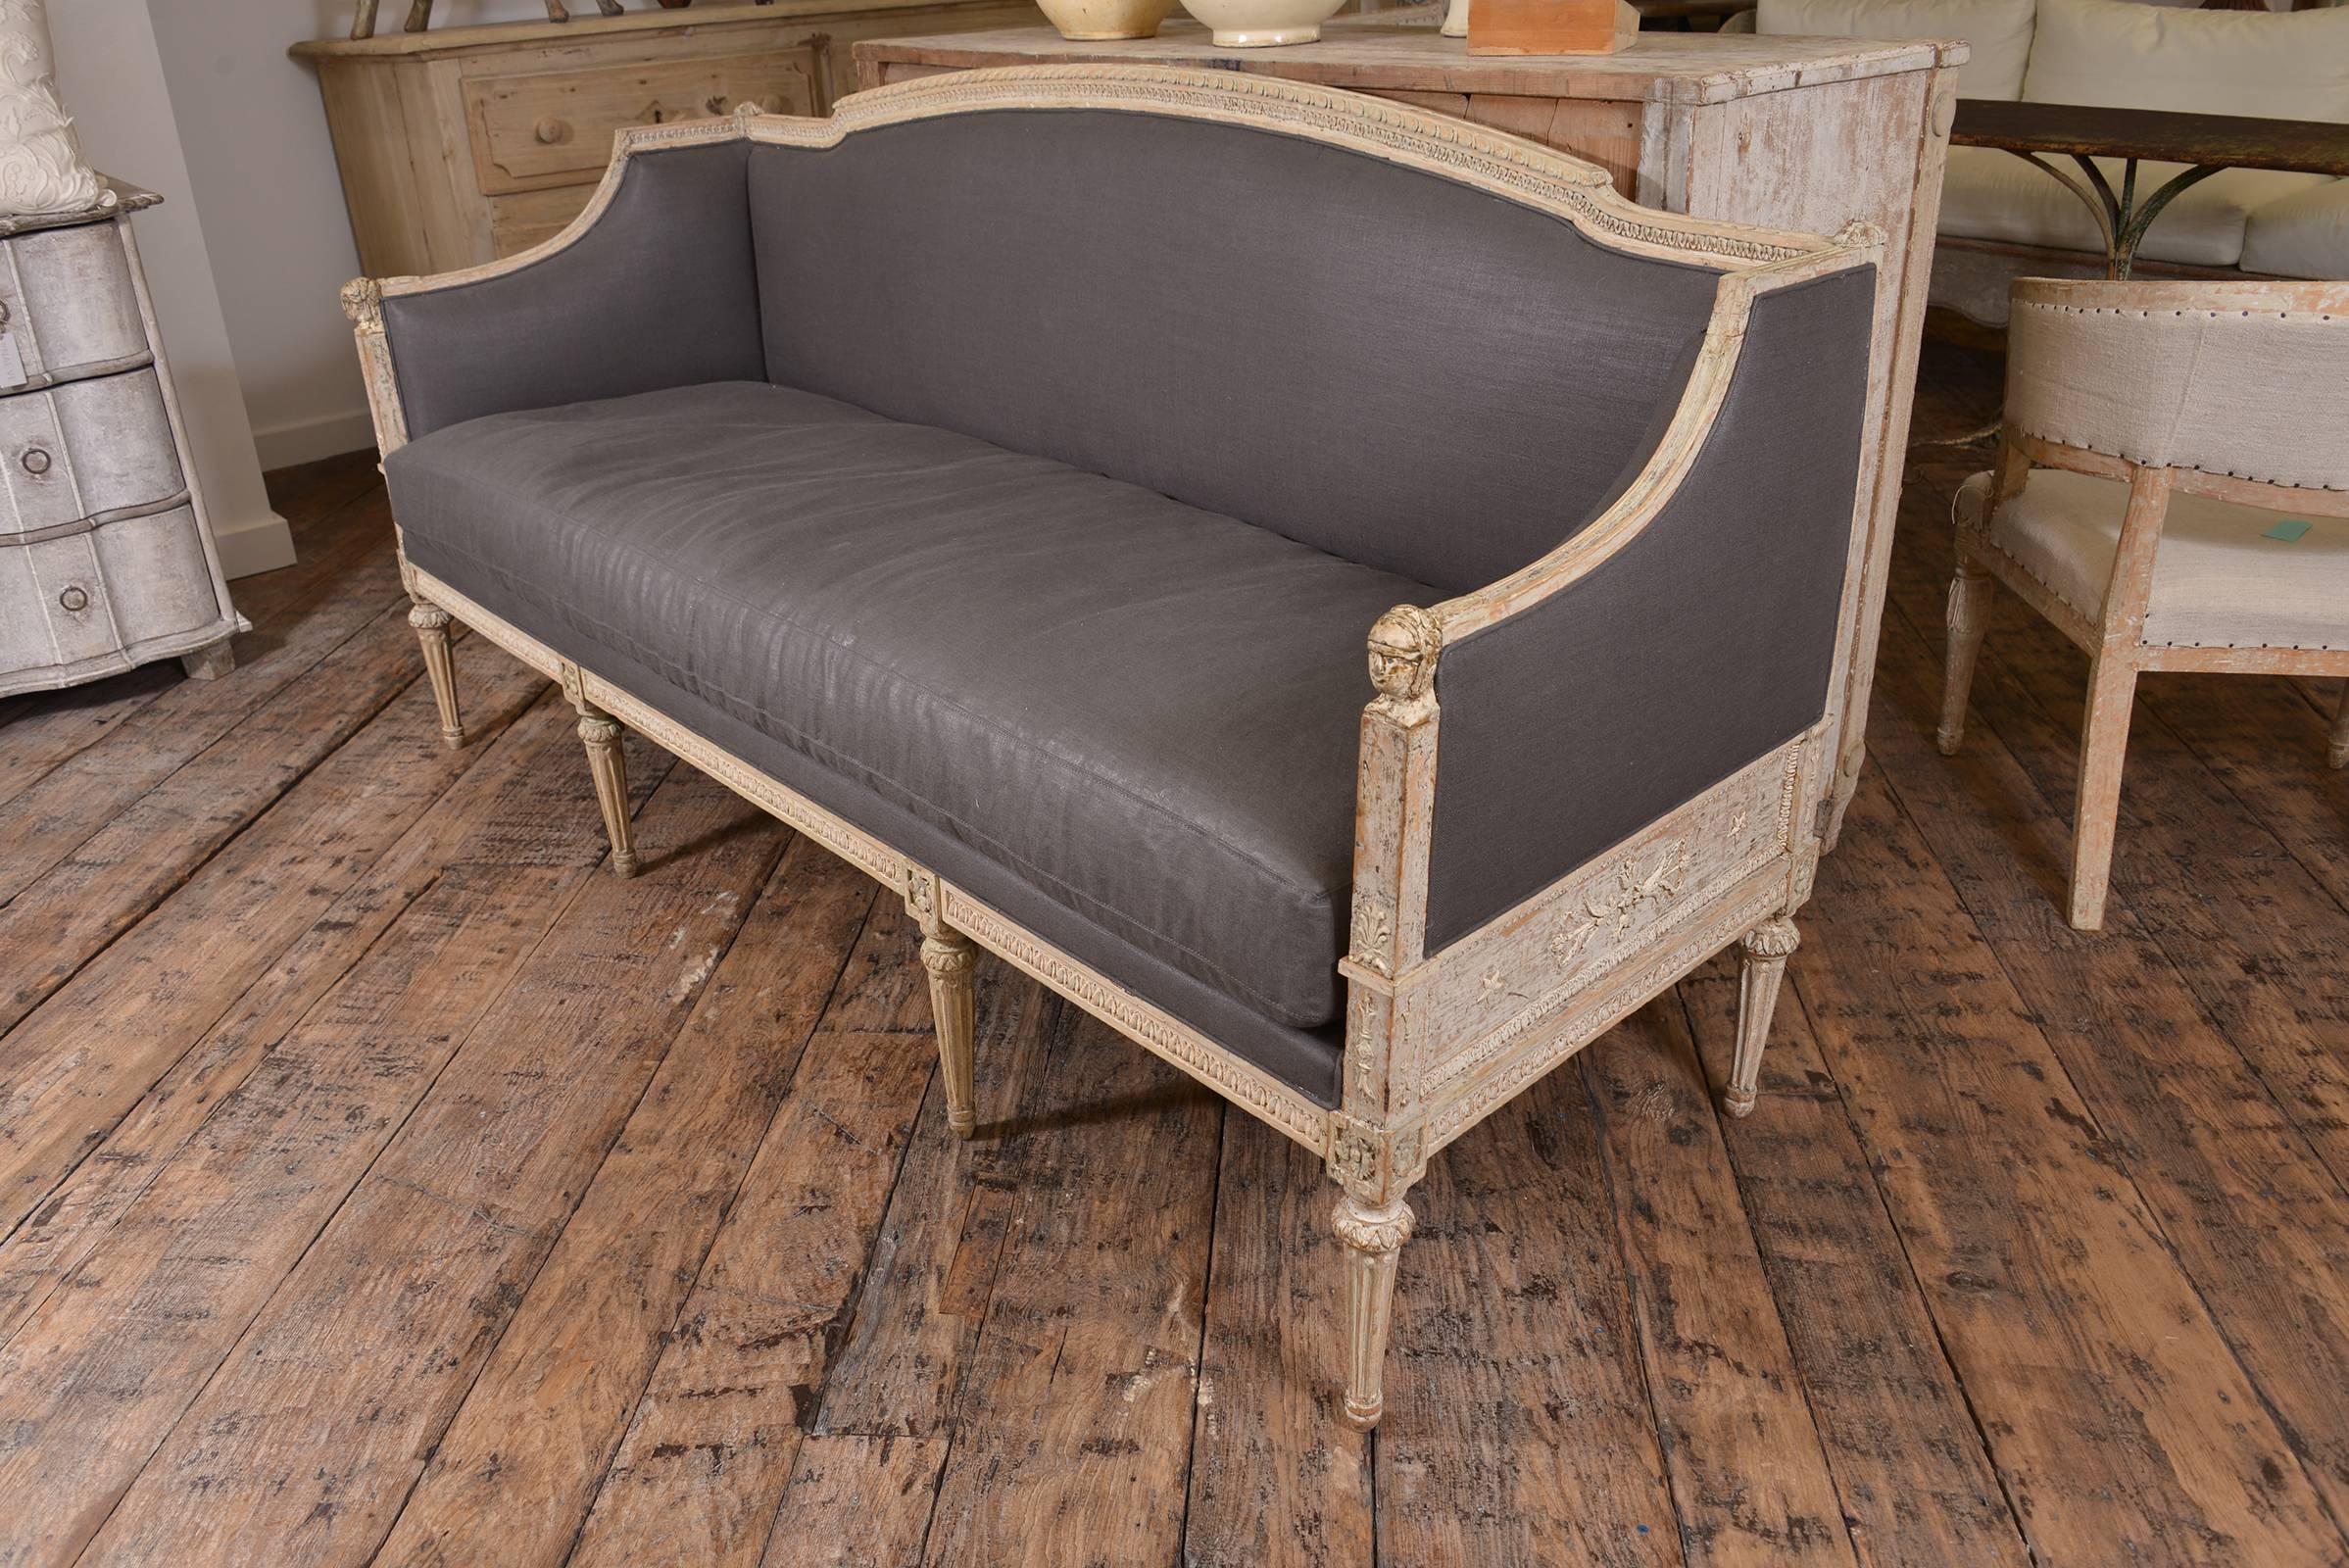 Stunning Swedish Gustavian bench upholstered in Holland and Sherry glazed linen charcoal.
Beautiful carving, scraped paint finish. A very chic piece.
 